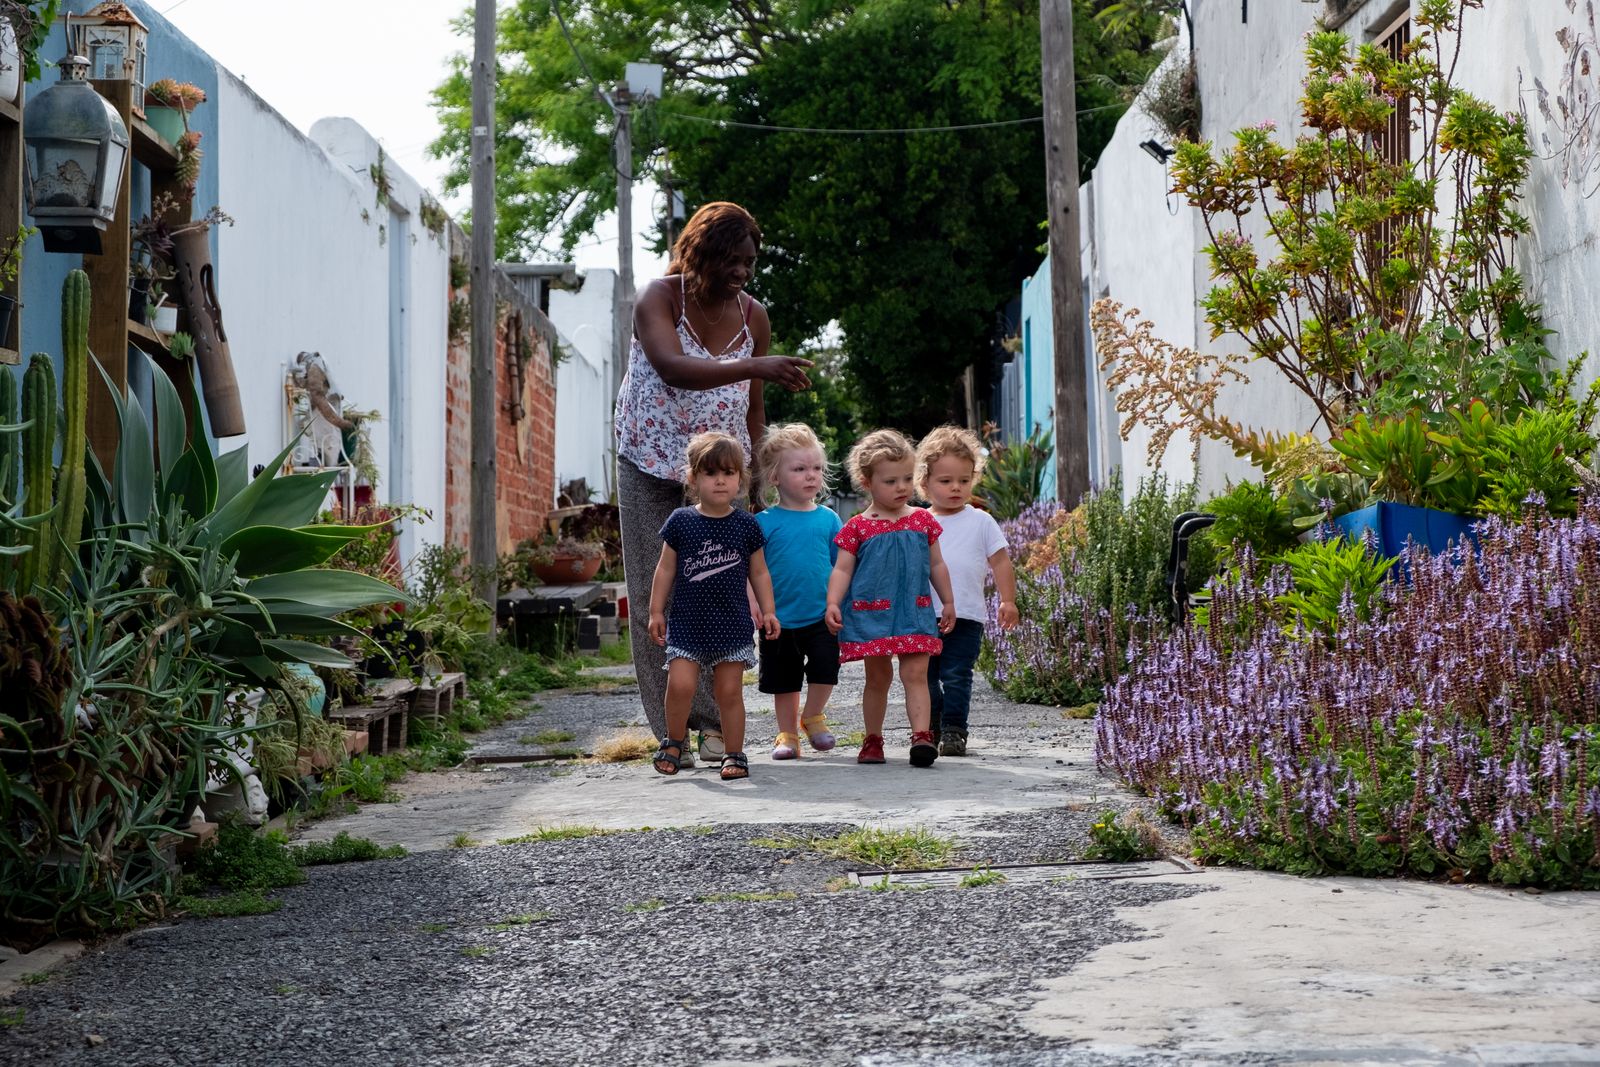 Teacher Ursula Bongongo with four toddlers walk through an alley, looking for butterflies. The toddlers are the members of the Active Baby Bilingual Playgroup, which Ursula ran for 2 years. 